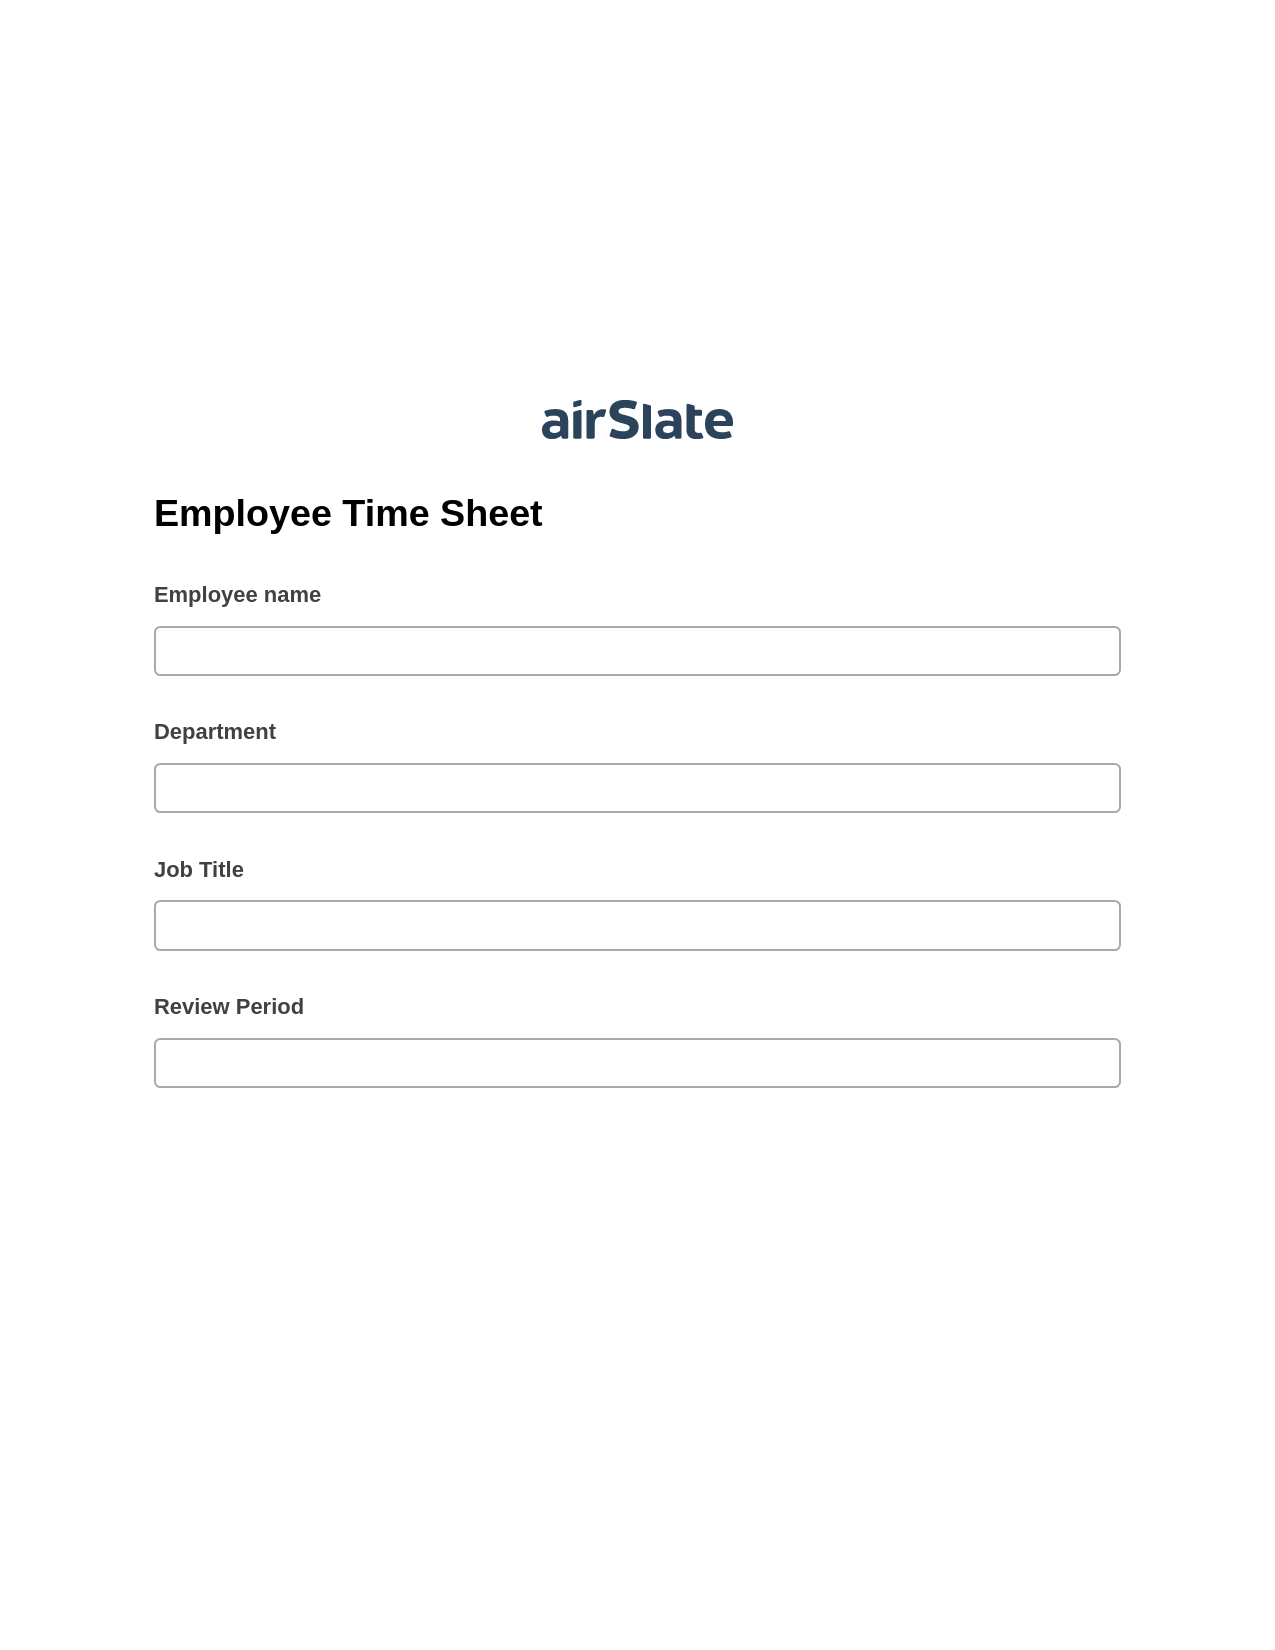 Employee Time Sheet Pre-fill from Google Sheets Bot, Update MS Dynamics 365 Record Bot, Archive to SharePoint Folder Bot